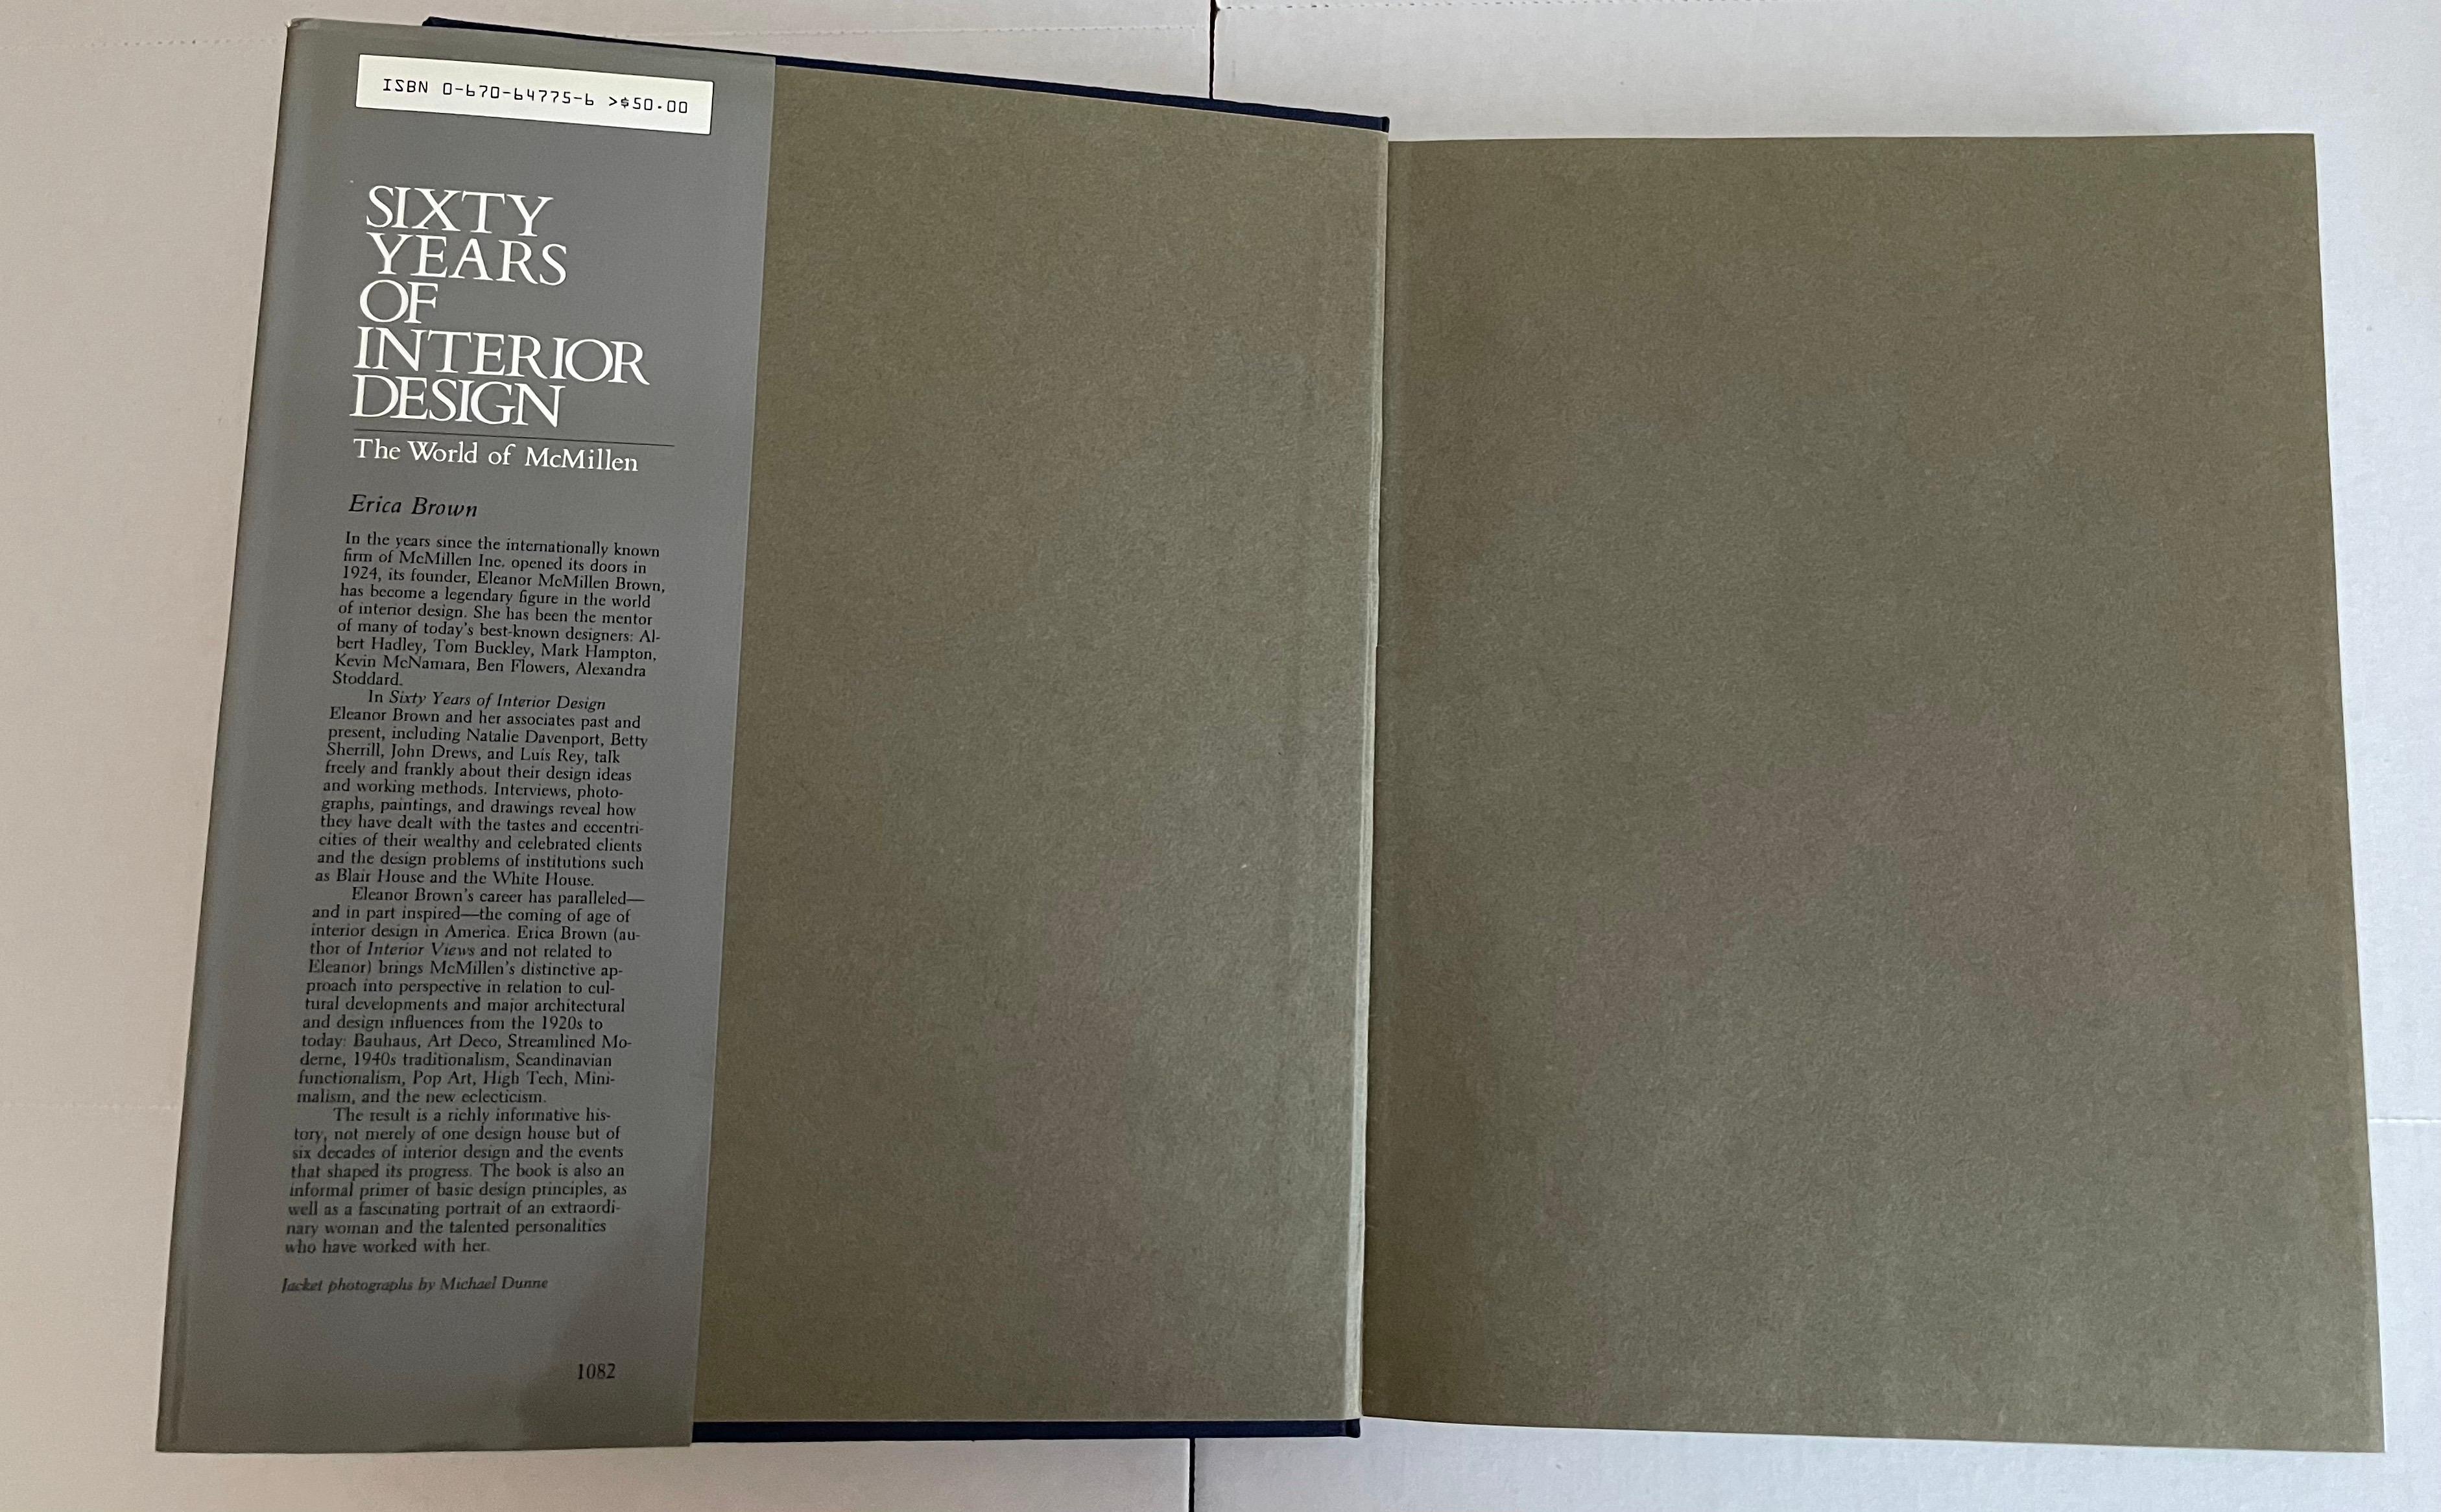 Sixty Years of Interior Design: The World of McMillen by Erica Brown.
Hardcover, 1st edition. Binding is tight and and there is no visible wear.